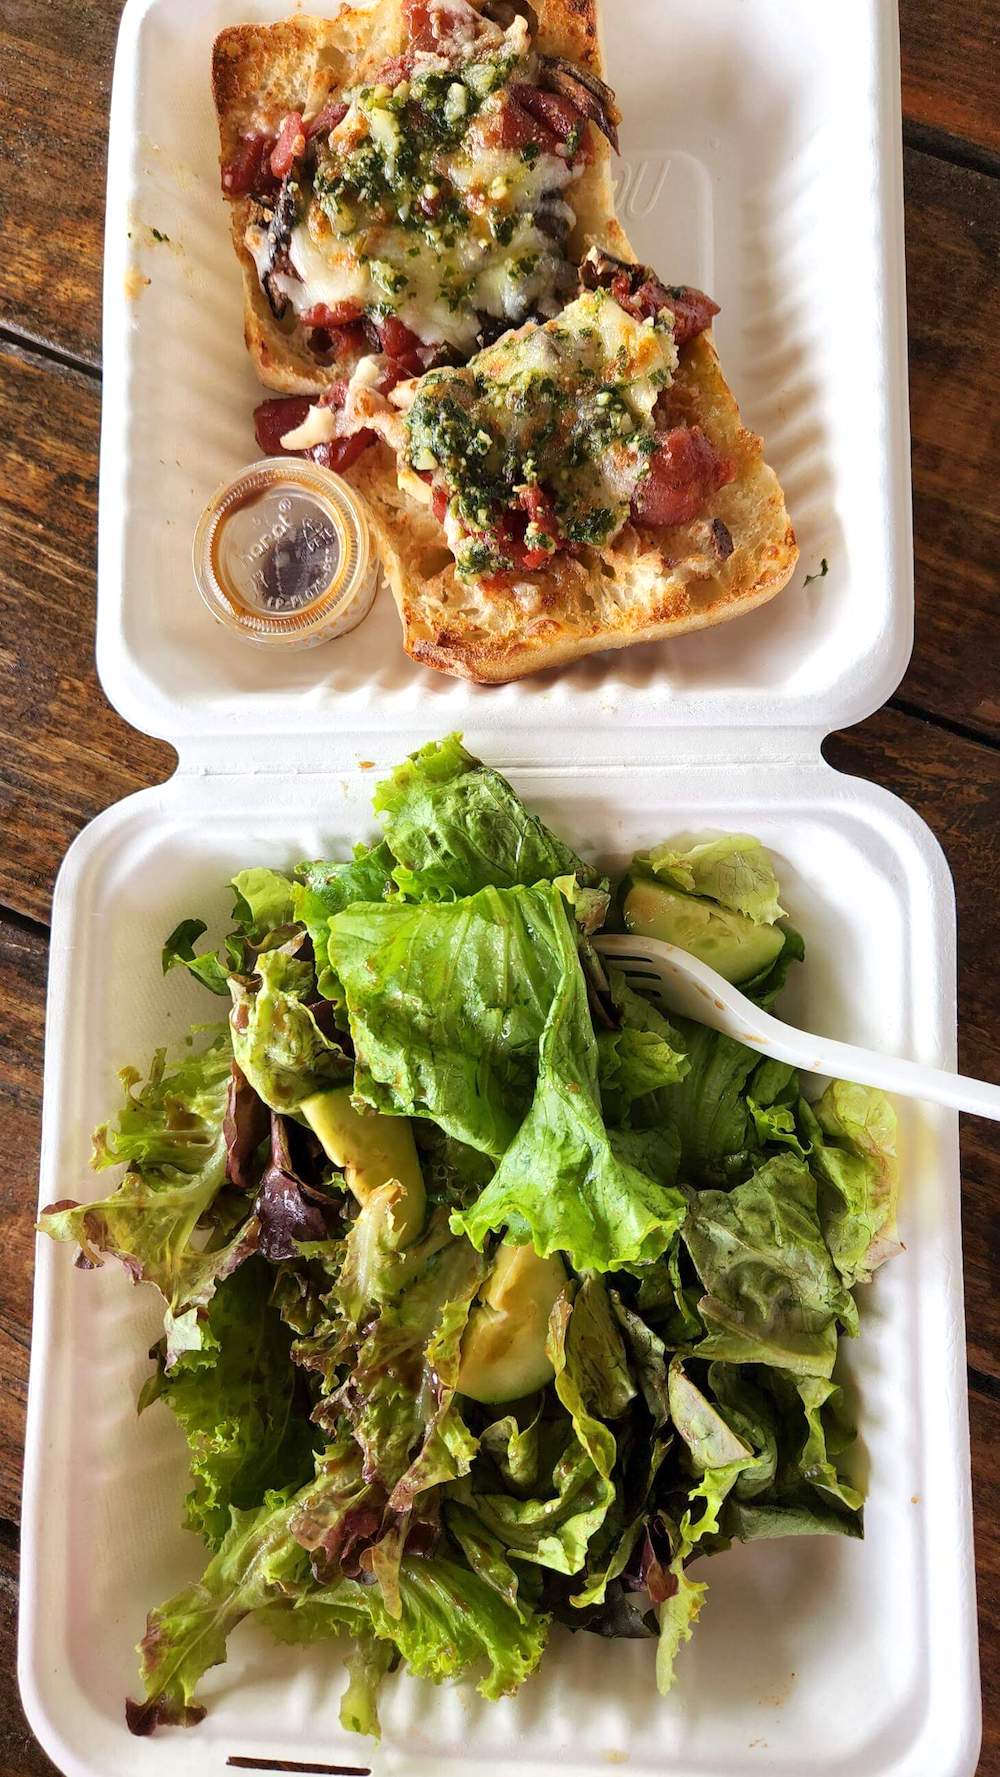 Image of french bread pizza and salad from Kahuku Farms on Oahu